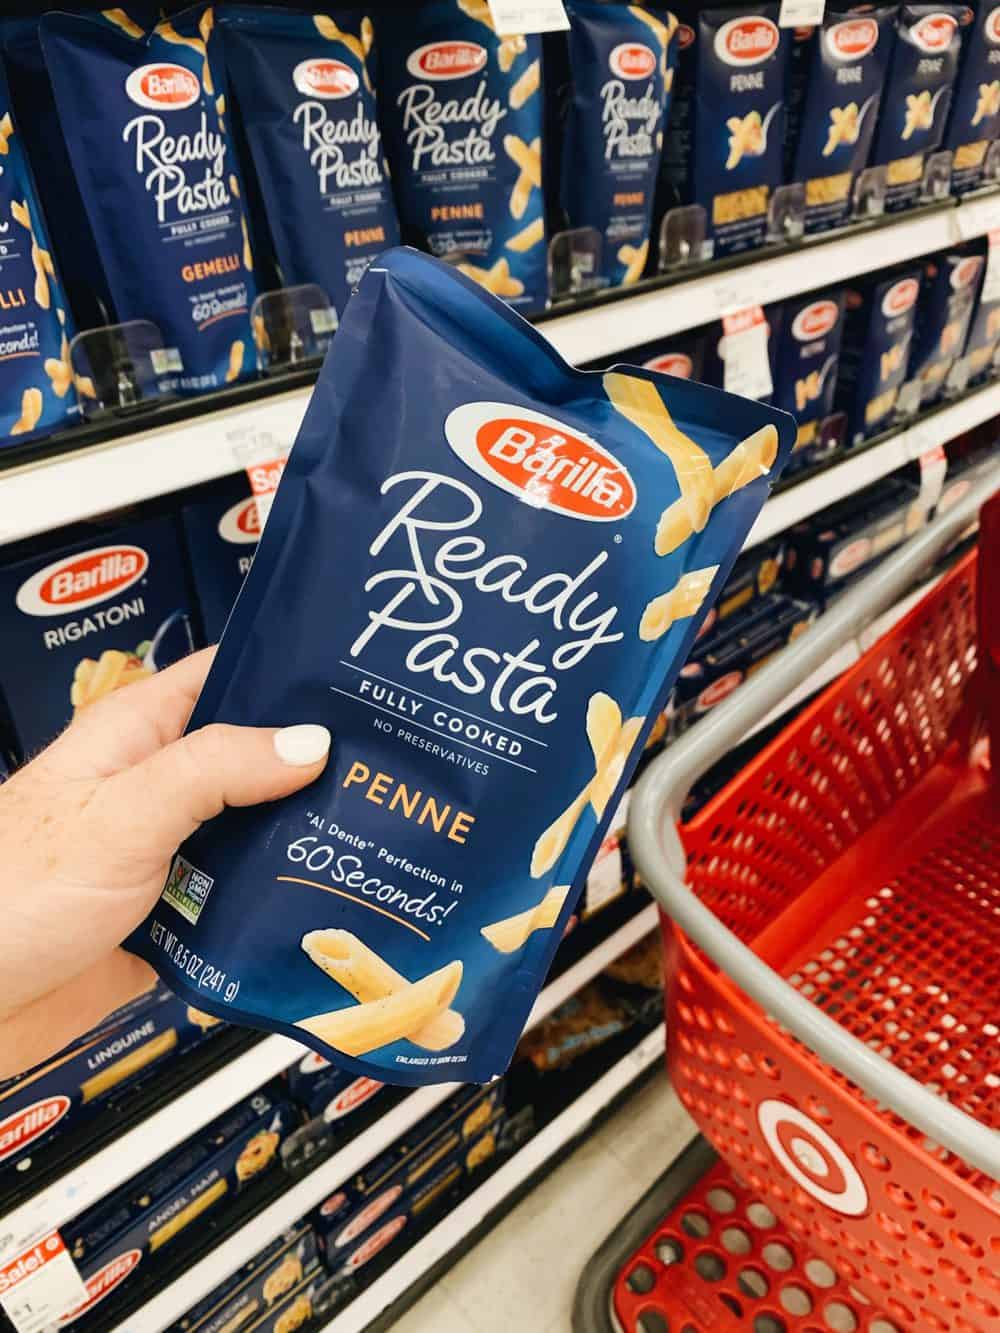 Ready pasta being held up in front of other ready pasta packages and a target shopping cart. 